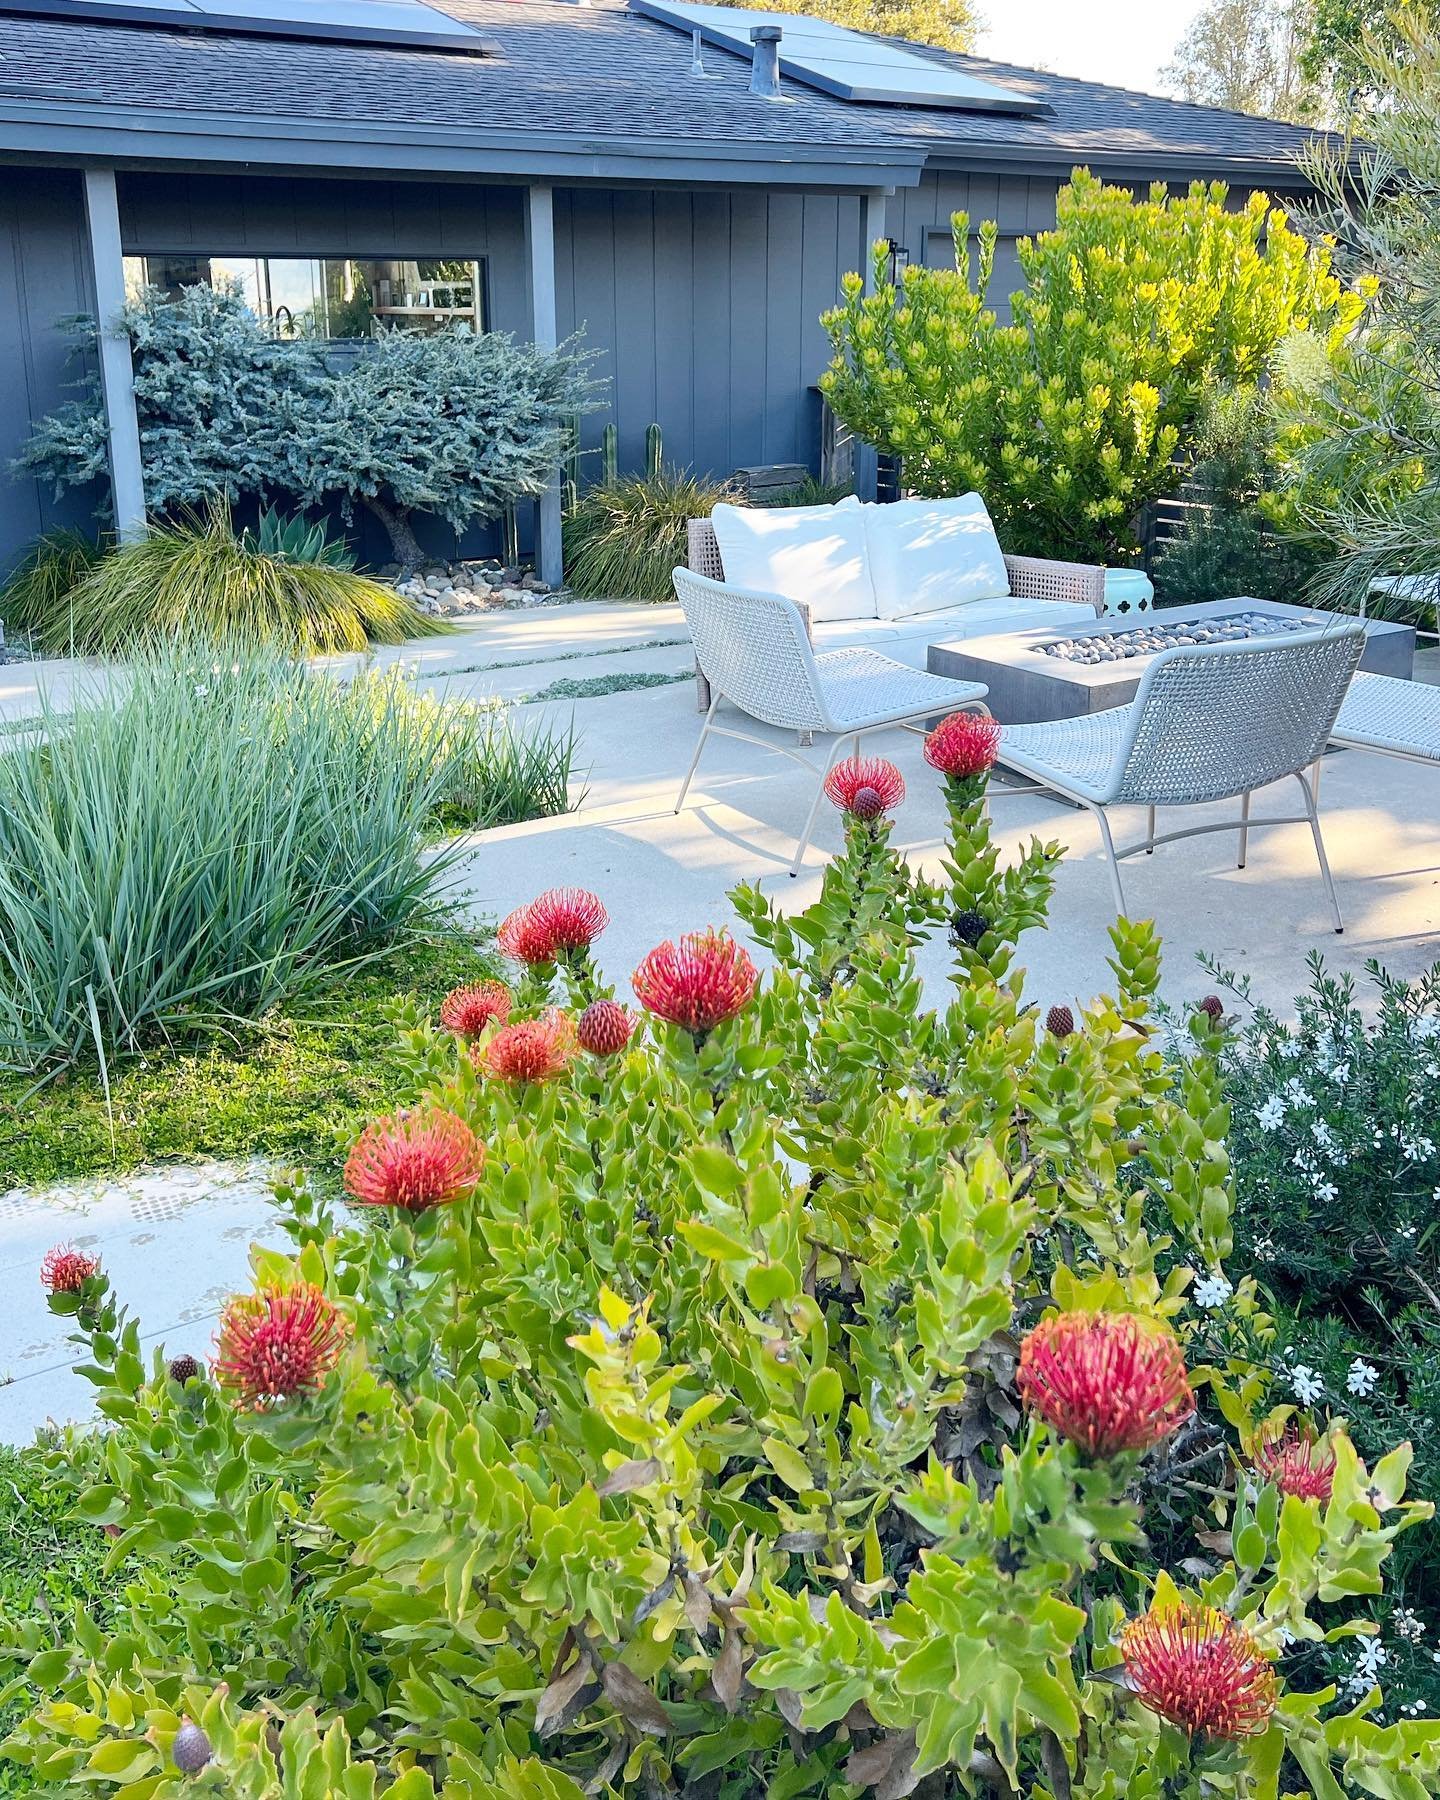 One day I&rsquo;ll get tired of sharing this front yard, but for now, enjoy the debut of Spring in Los Osos! 
.
.
.
#ncdesigns #landscapearchitecture #thisislandscapearchitecture #landscapedesign #dwellondesign #sunsetmag #sunsetmagazine #sunsetmagic